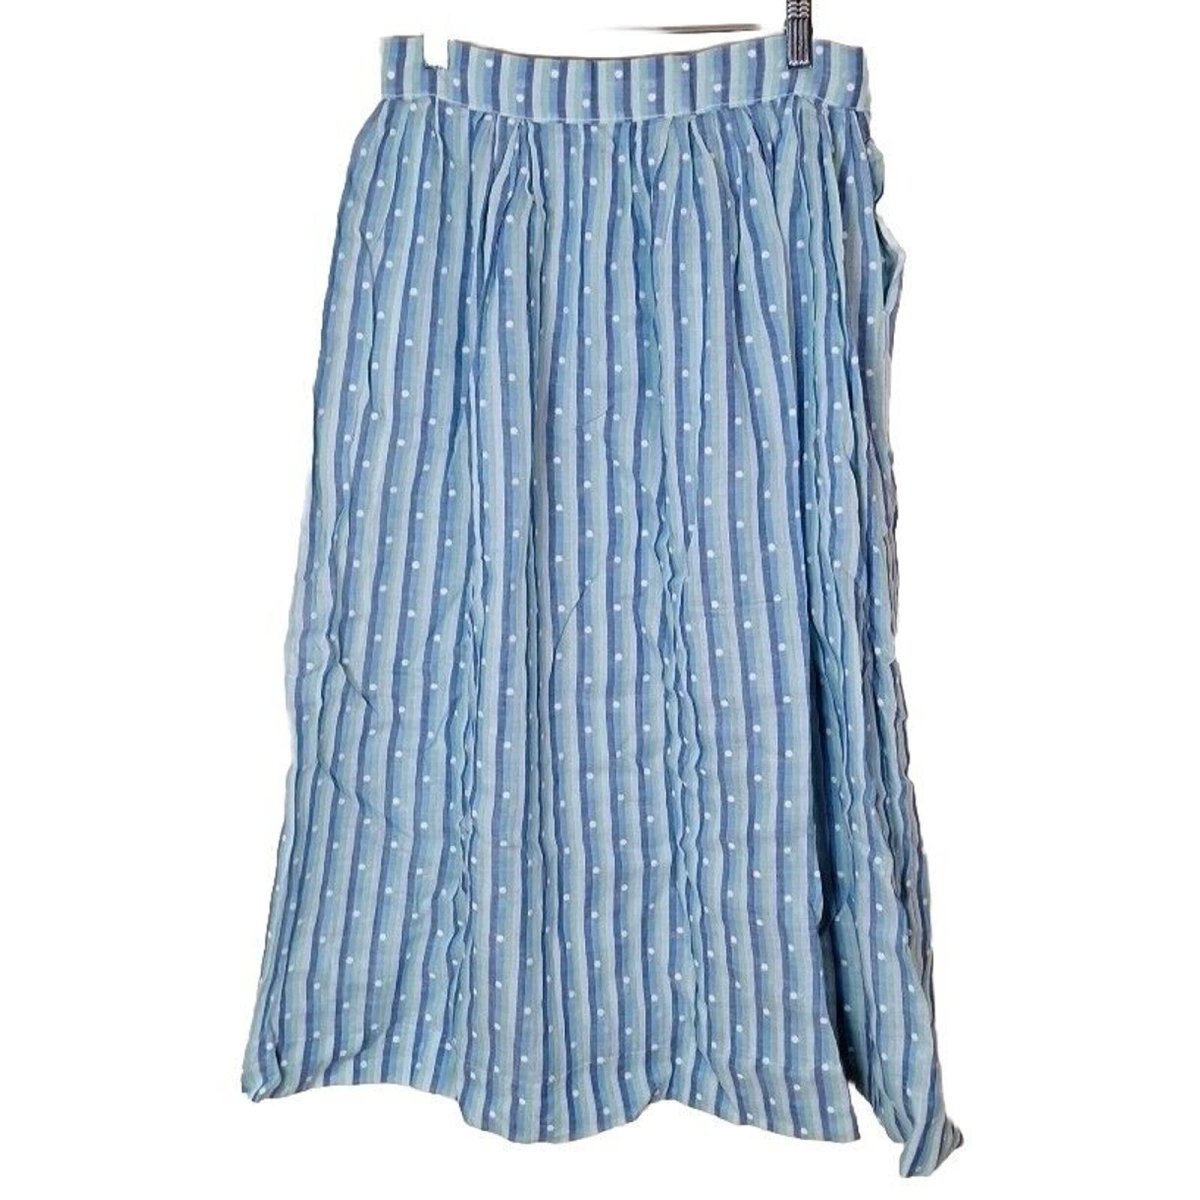 Vintage 40s/50s Blue Green Striped Full Midi Skirt Women Size Small Waist 26" - themallvintage The Mall Vintage